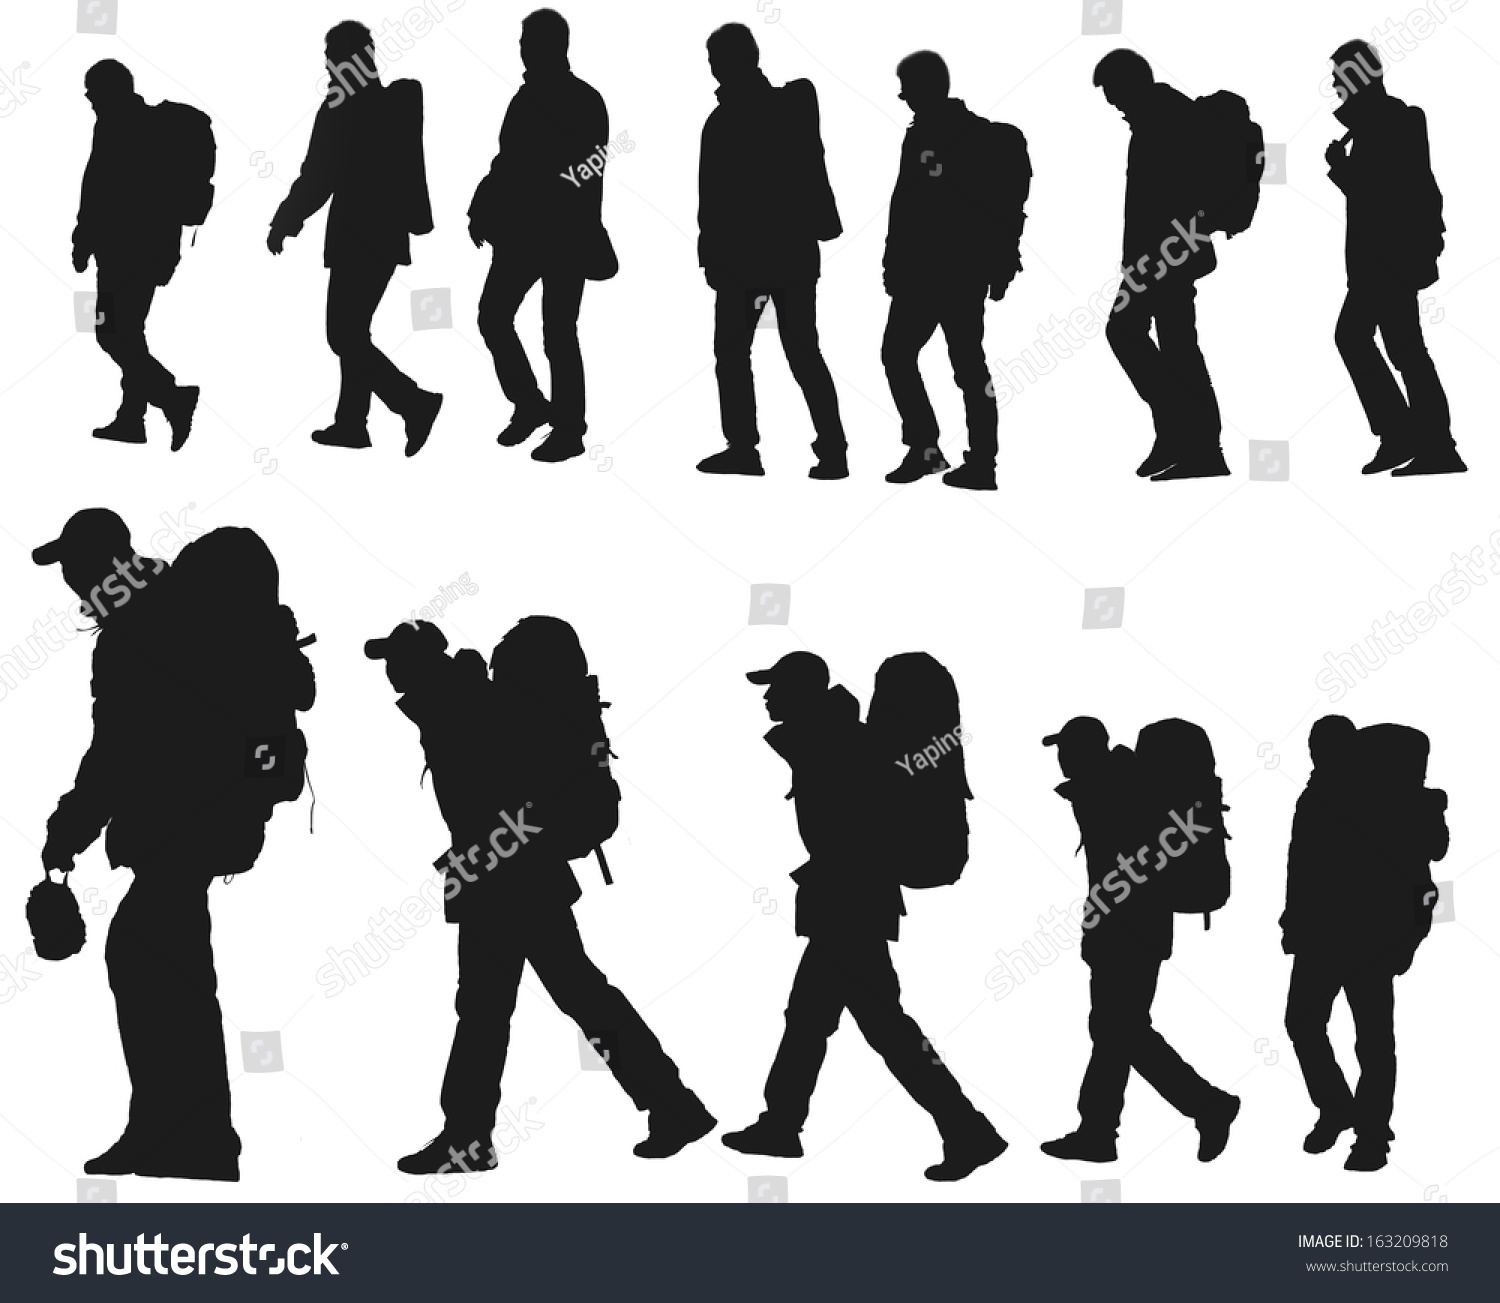 Silhouette Hikers Isolated On White Background Stock Photo & Image ...